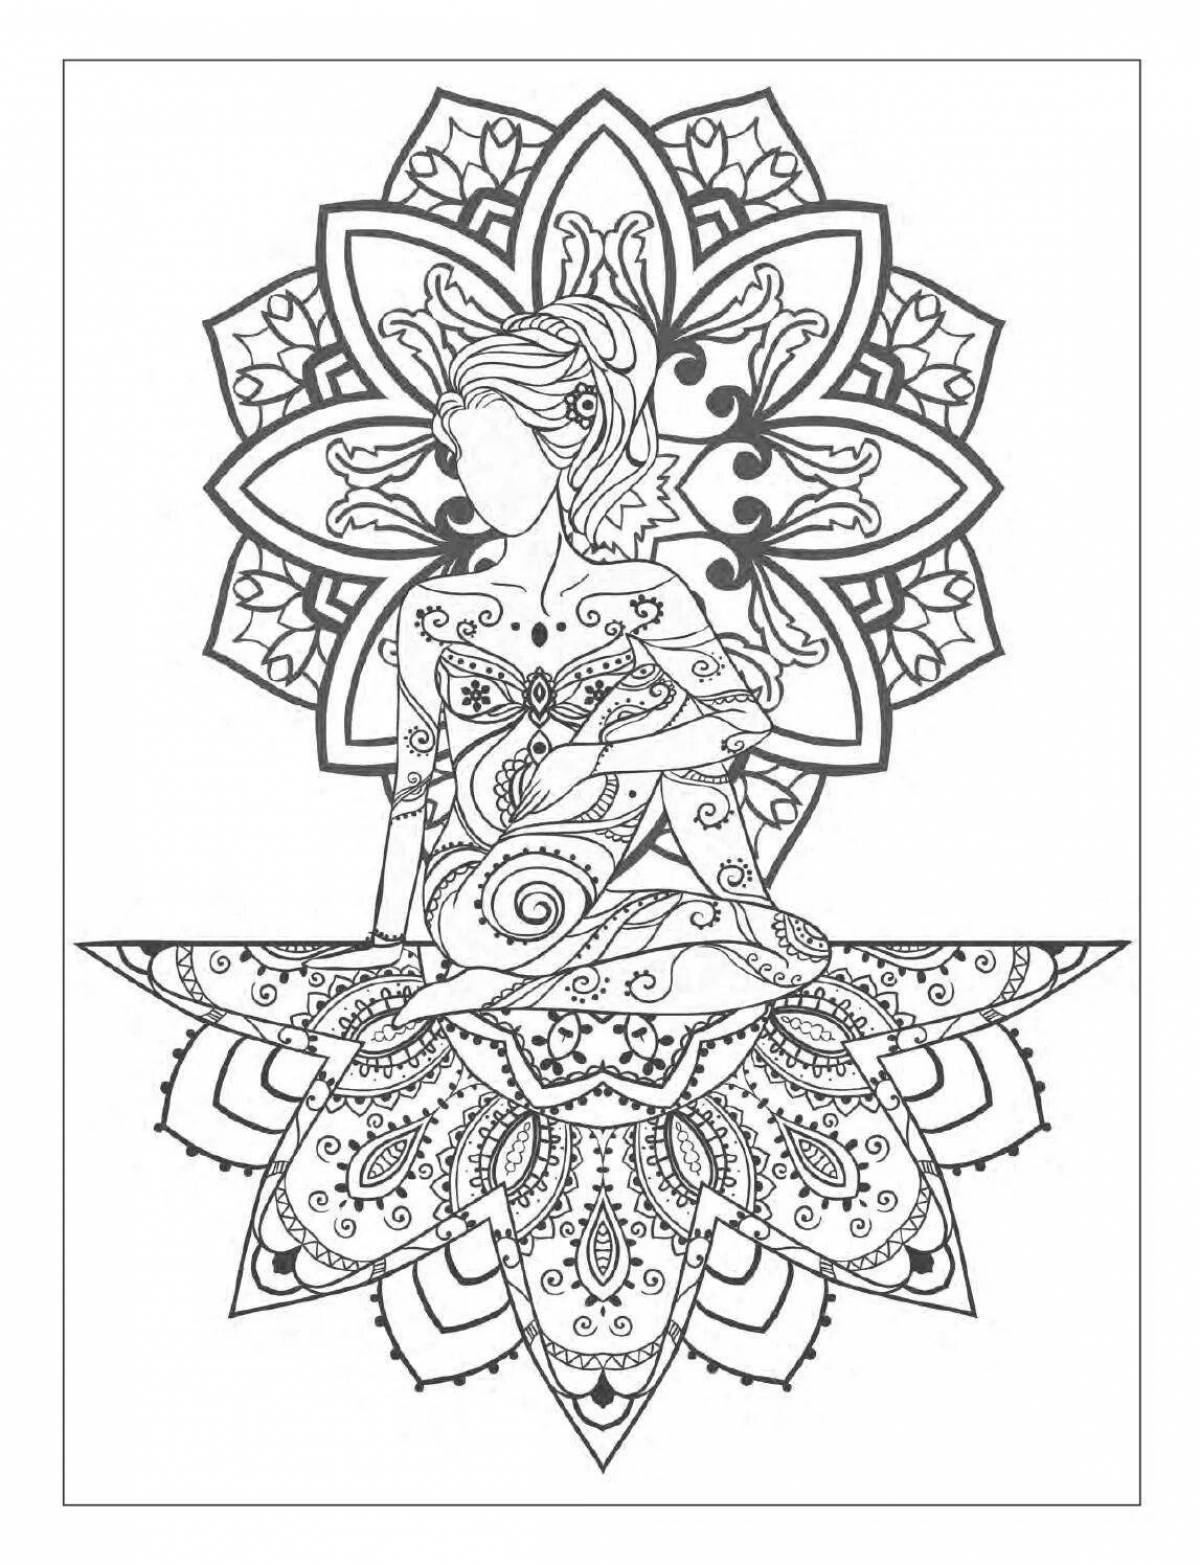 Bright coloring book, meditative for adults